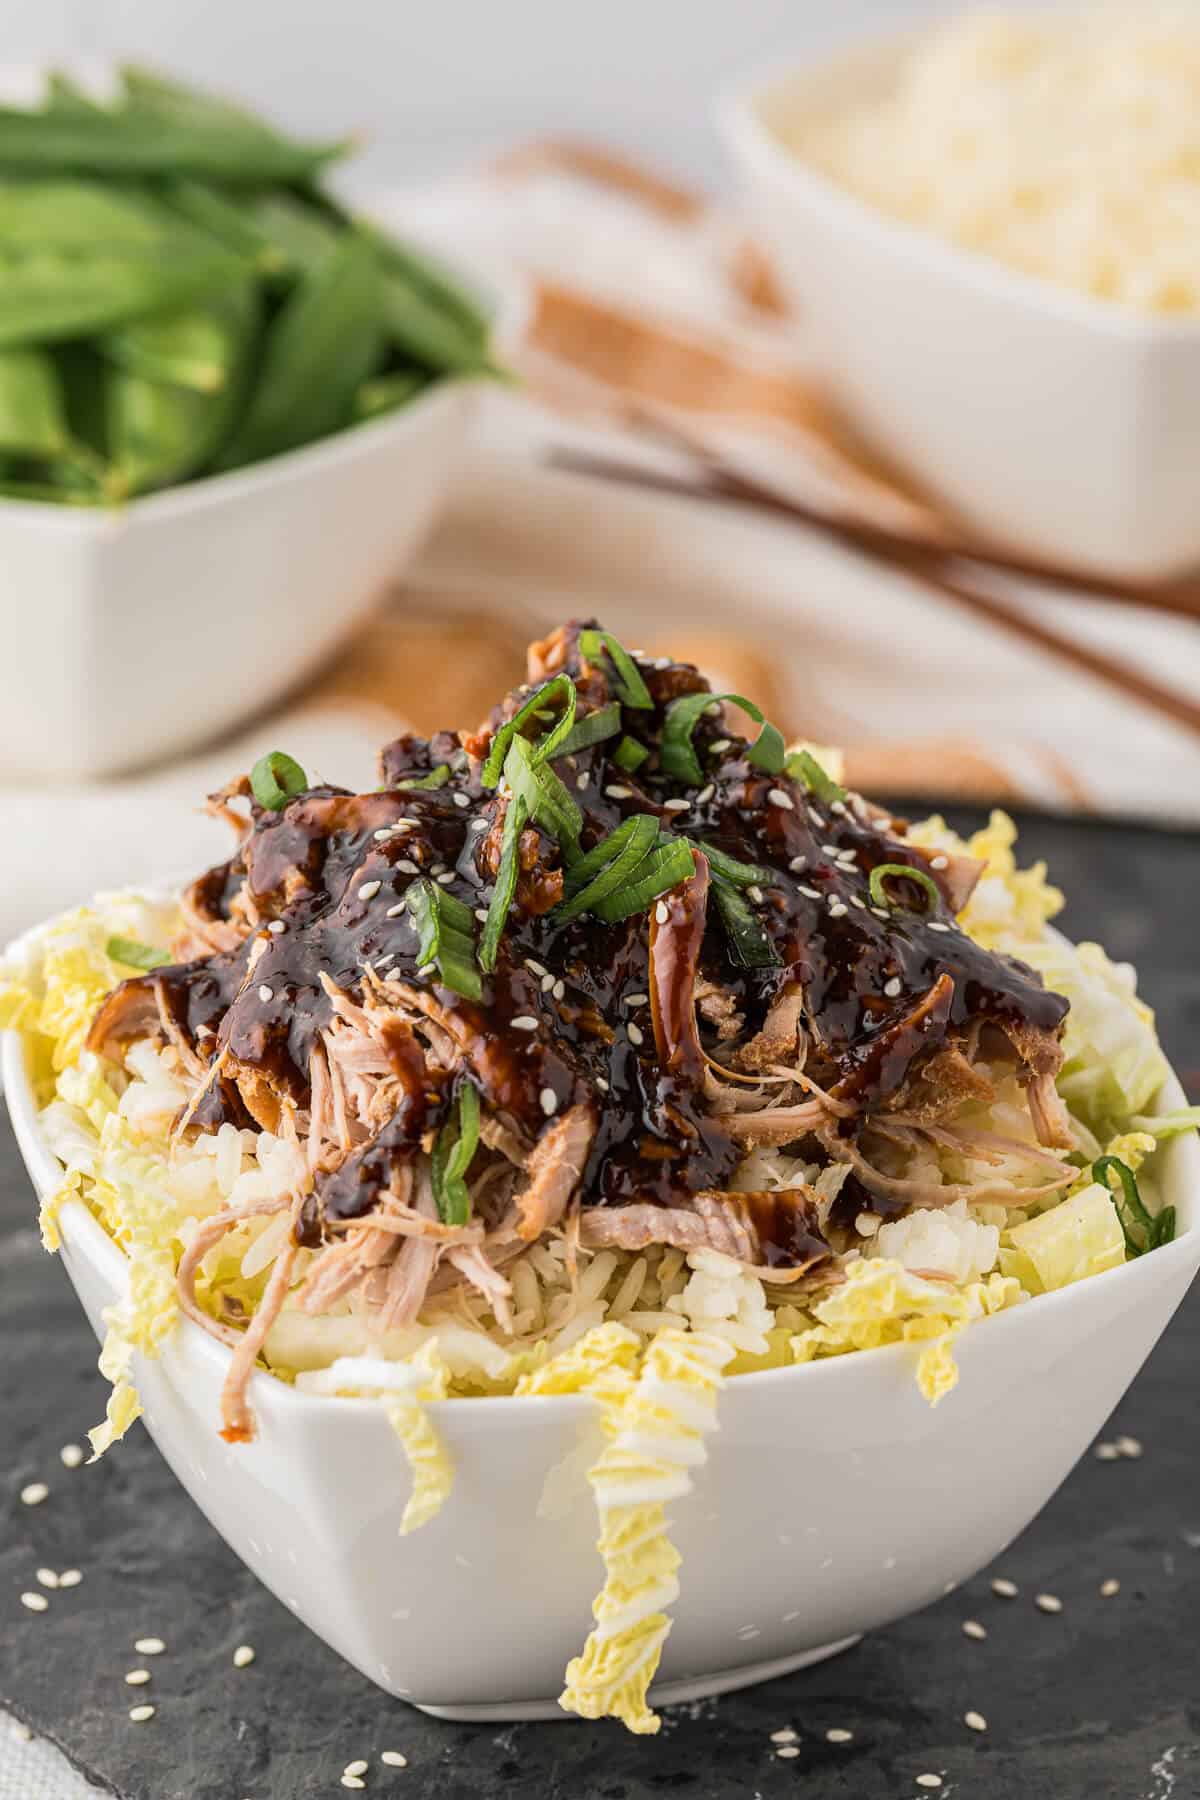 A bowl of rice, cabbage and shredded Asian pork tenderloin.